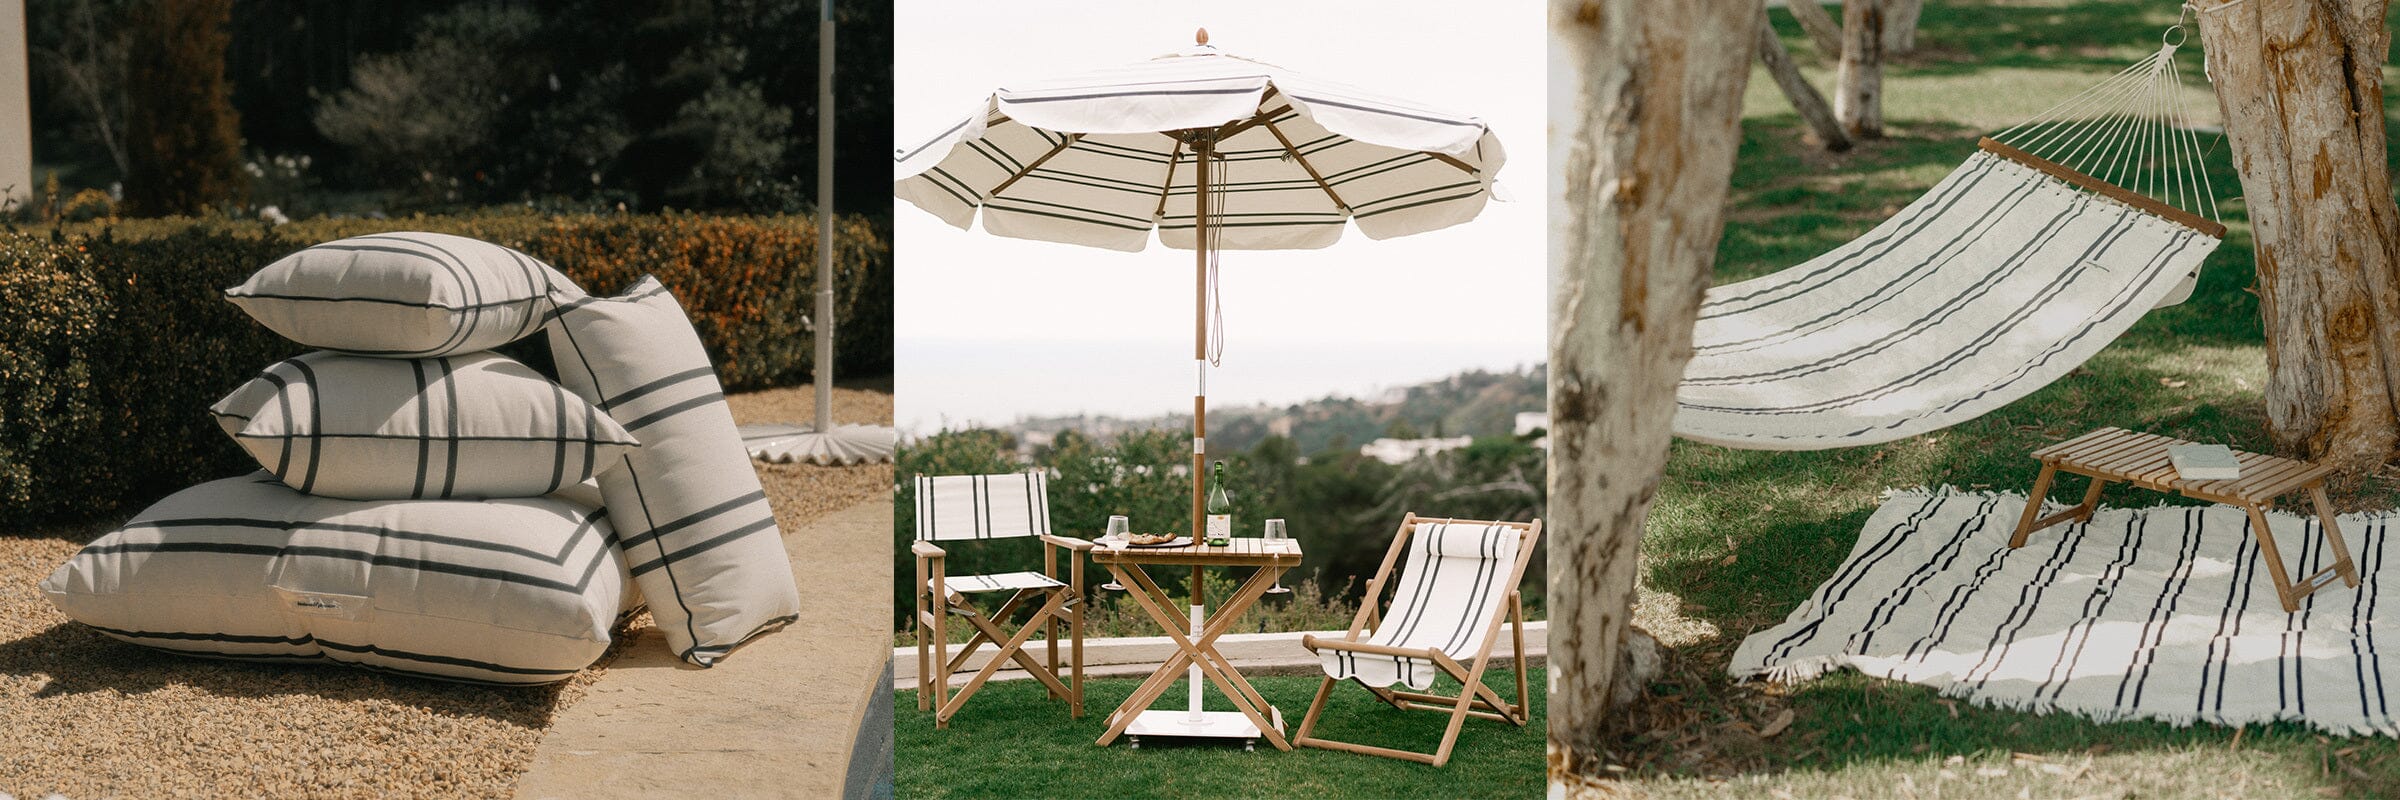 Malibu Black Stripe Collection showing pillows, umbrellas and chairs